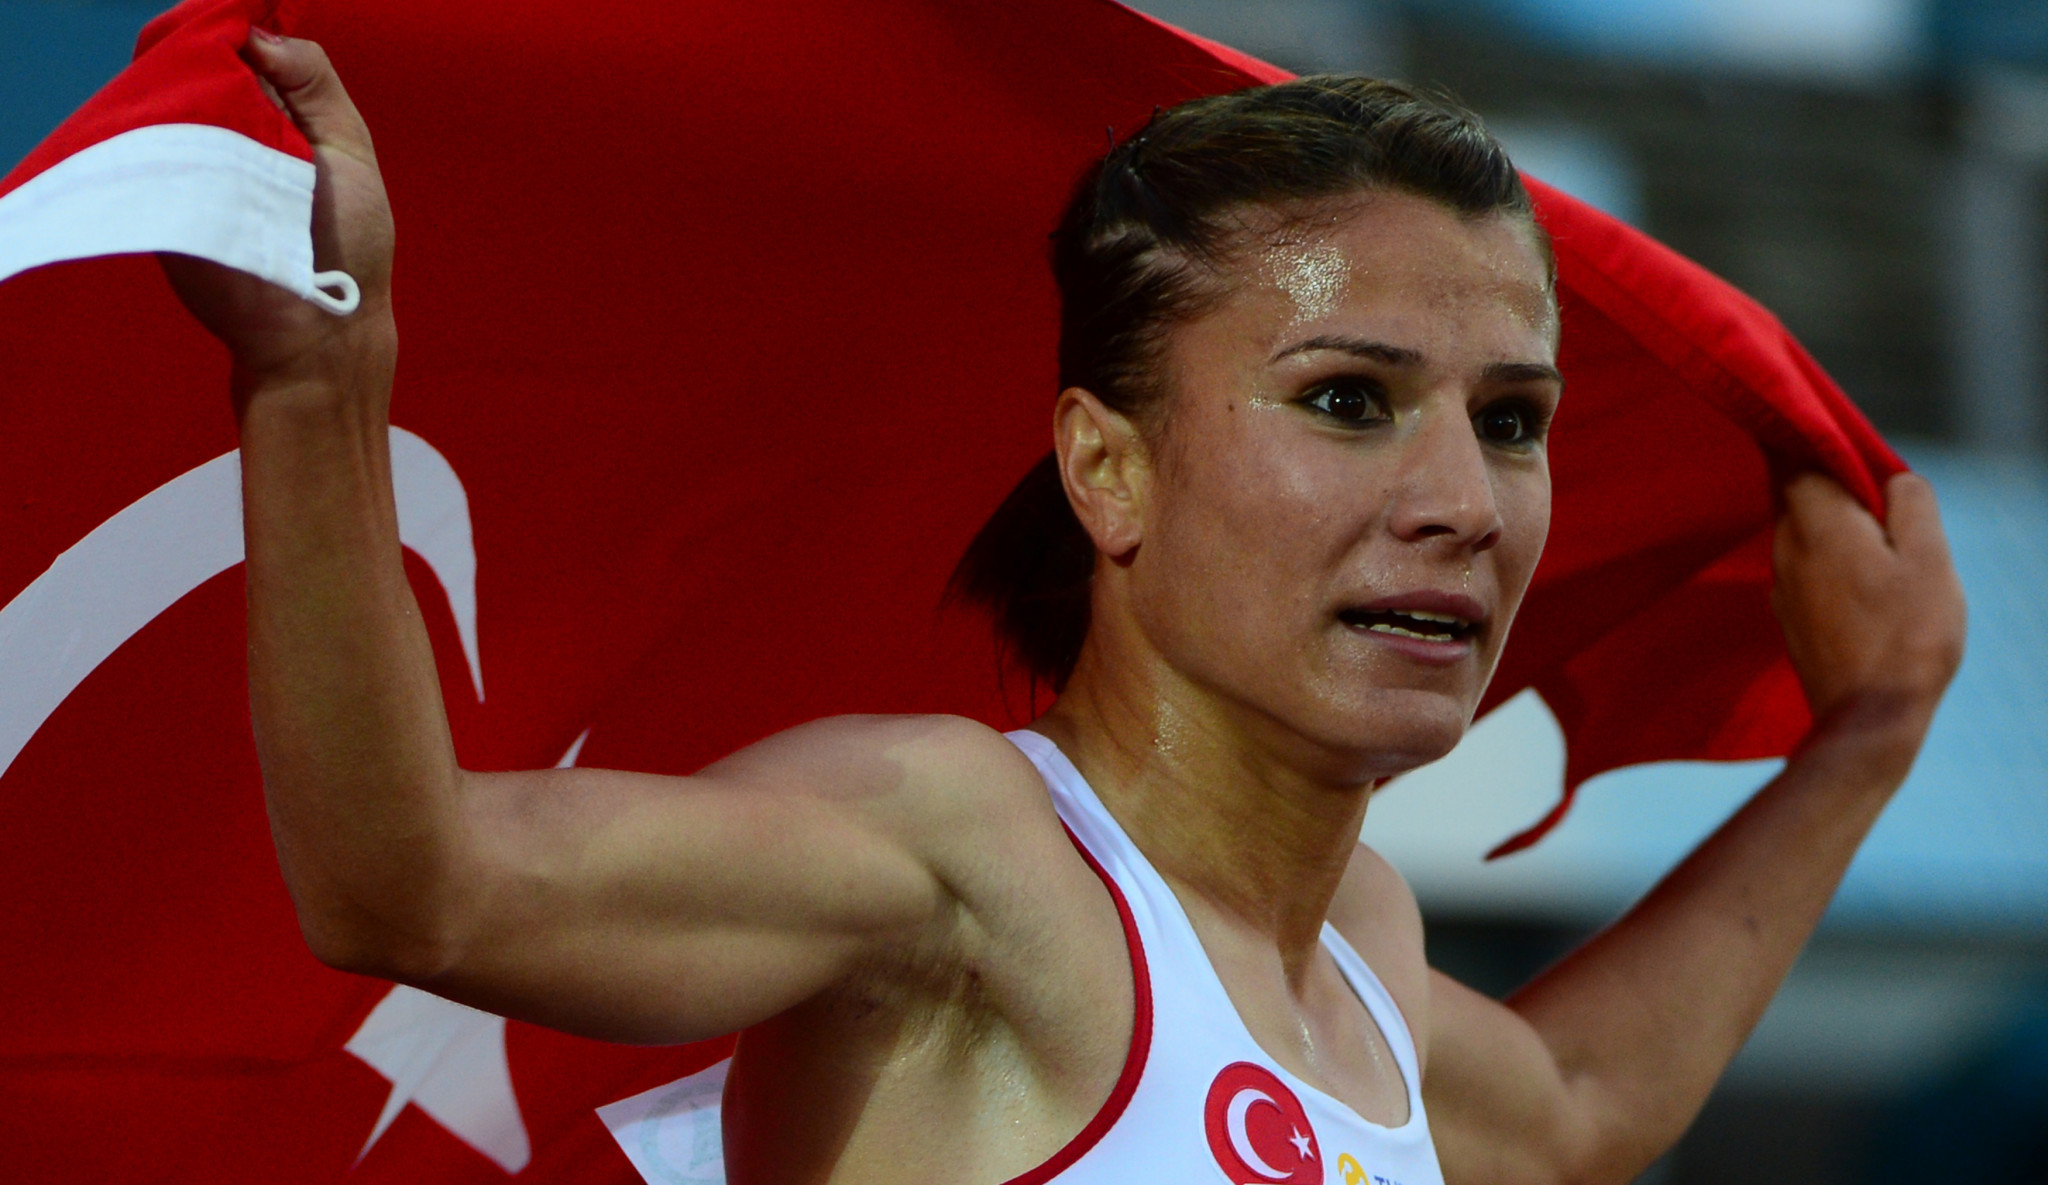 Turkish athlete Mıngır found guilty of doping offence at London 2012